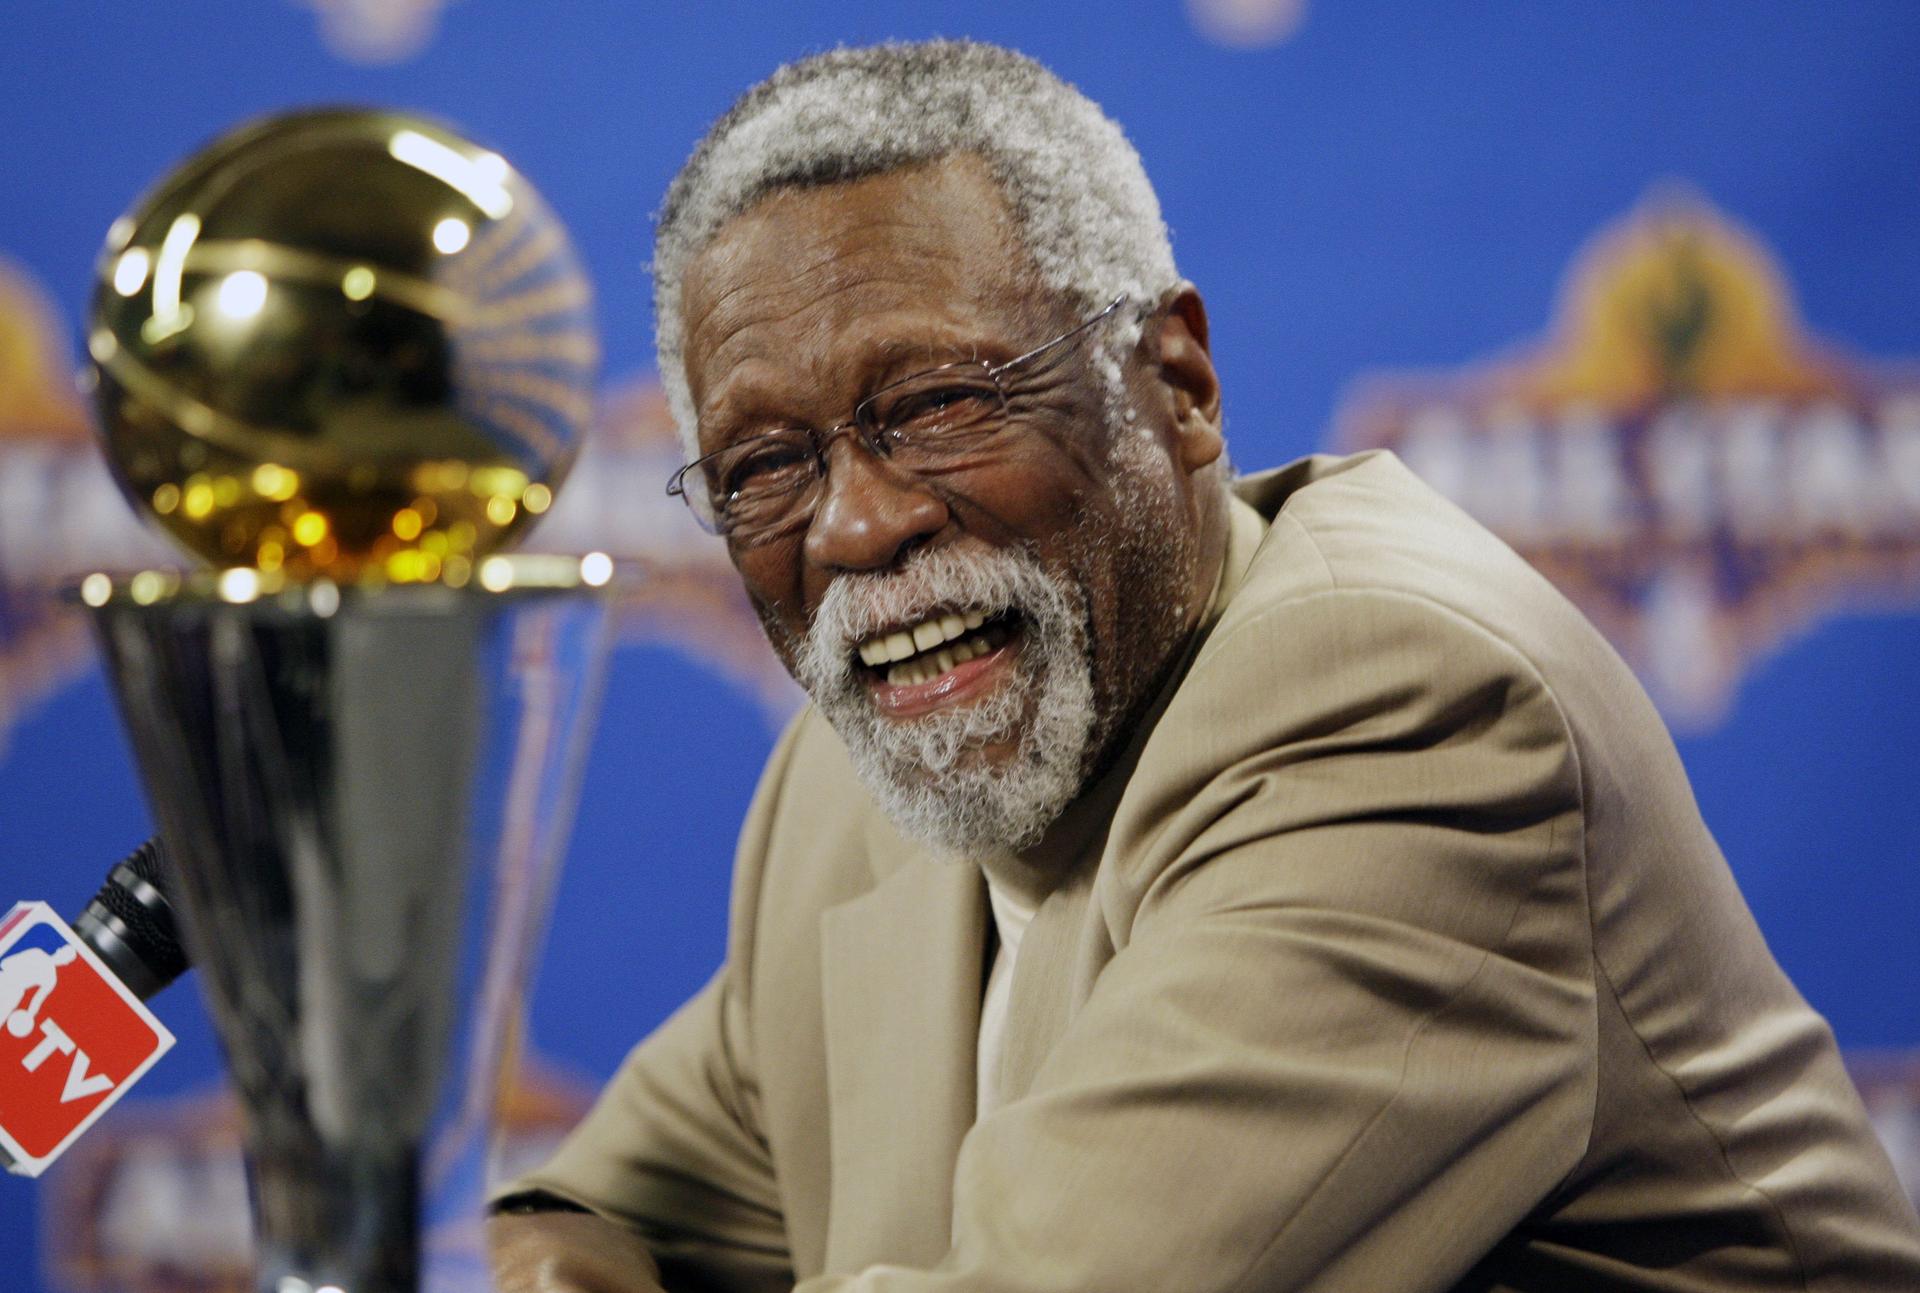 NBA Announces it Will Retire Hall of Famer Bill Russell's No. 6 League Wide